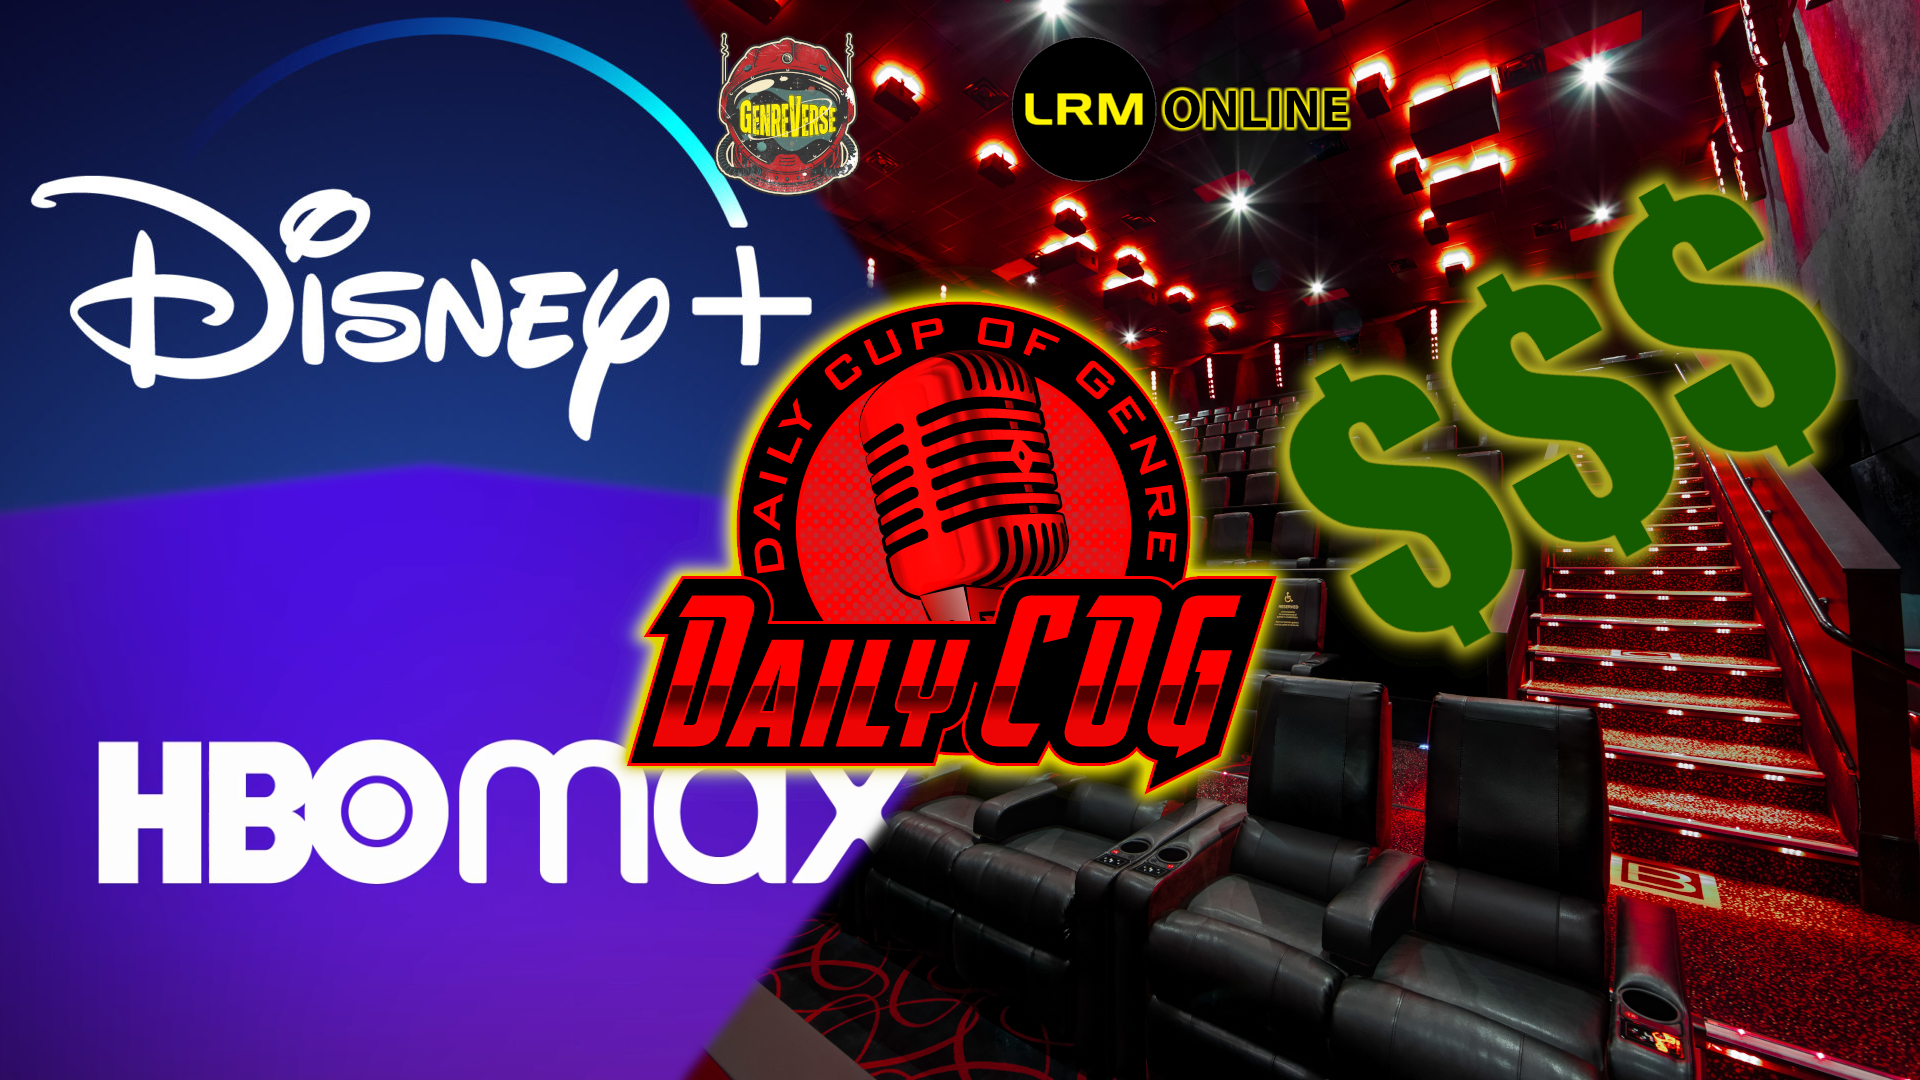 Disney To Release The Rest of 2021 Films in Theaters Only Theaters, Movie Budgets, And The Audience killing hollywood and gaming Daily COG Entertainment News